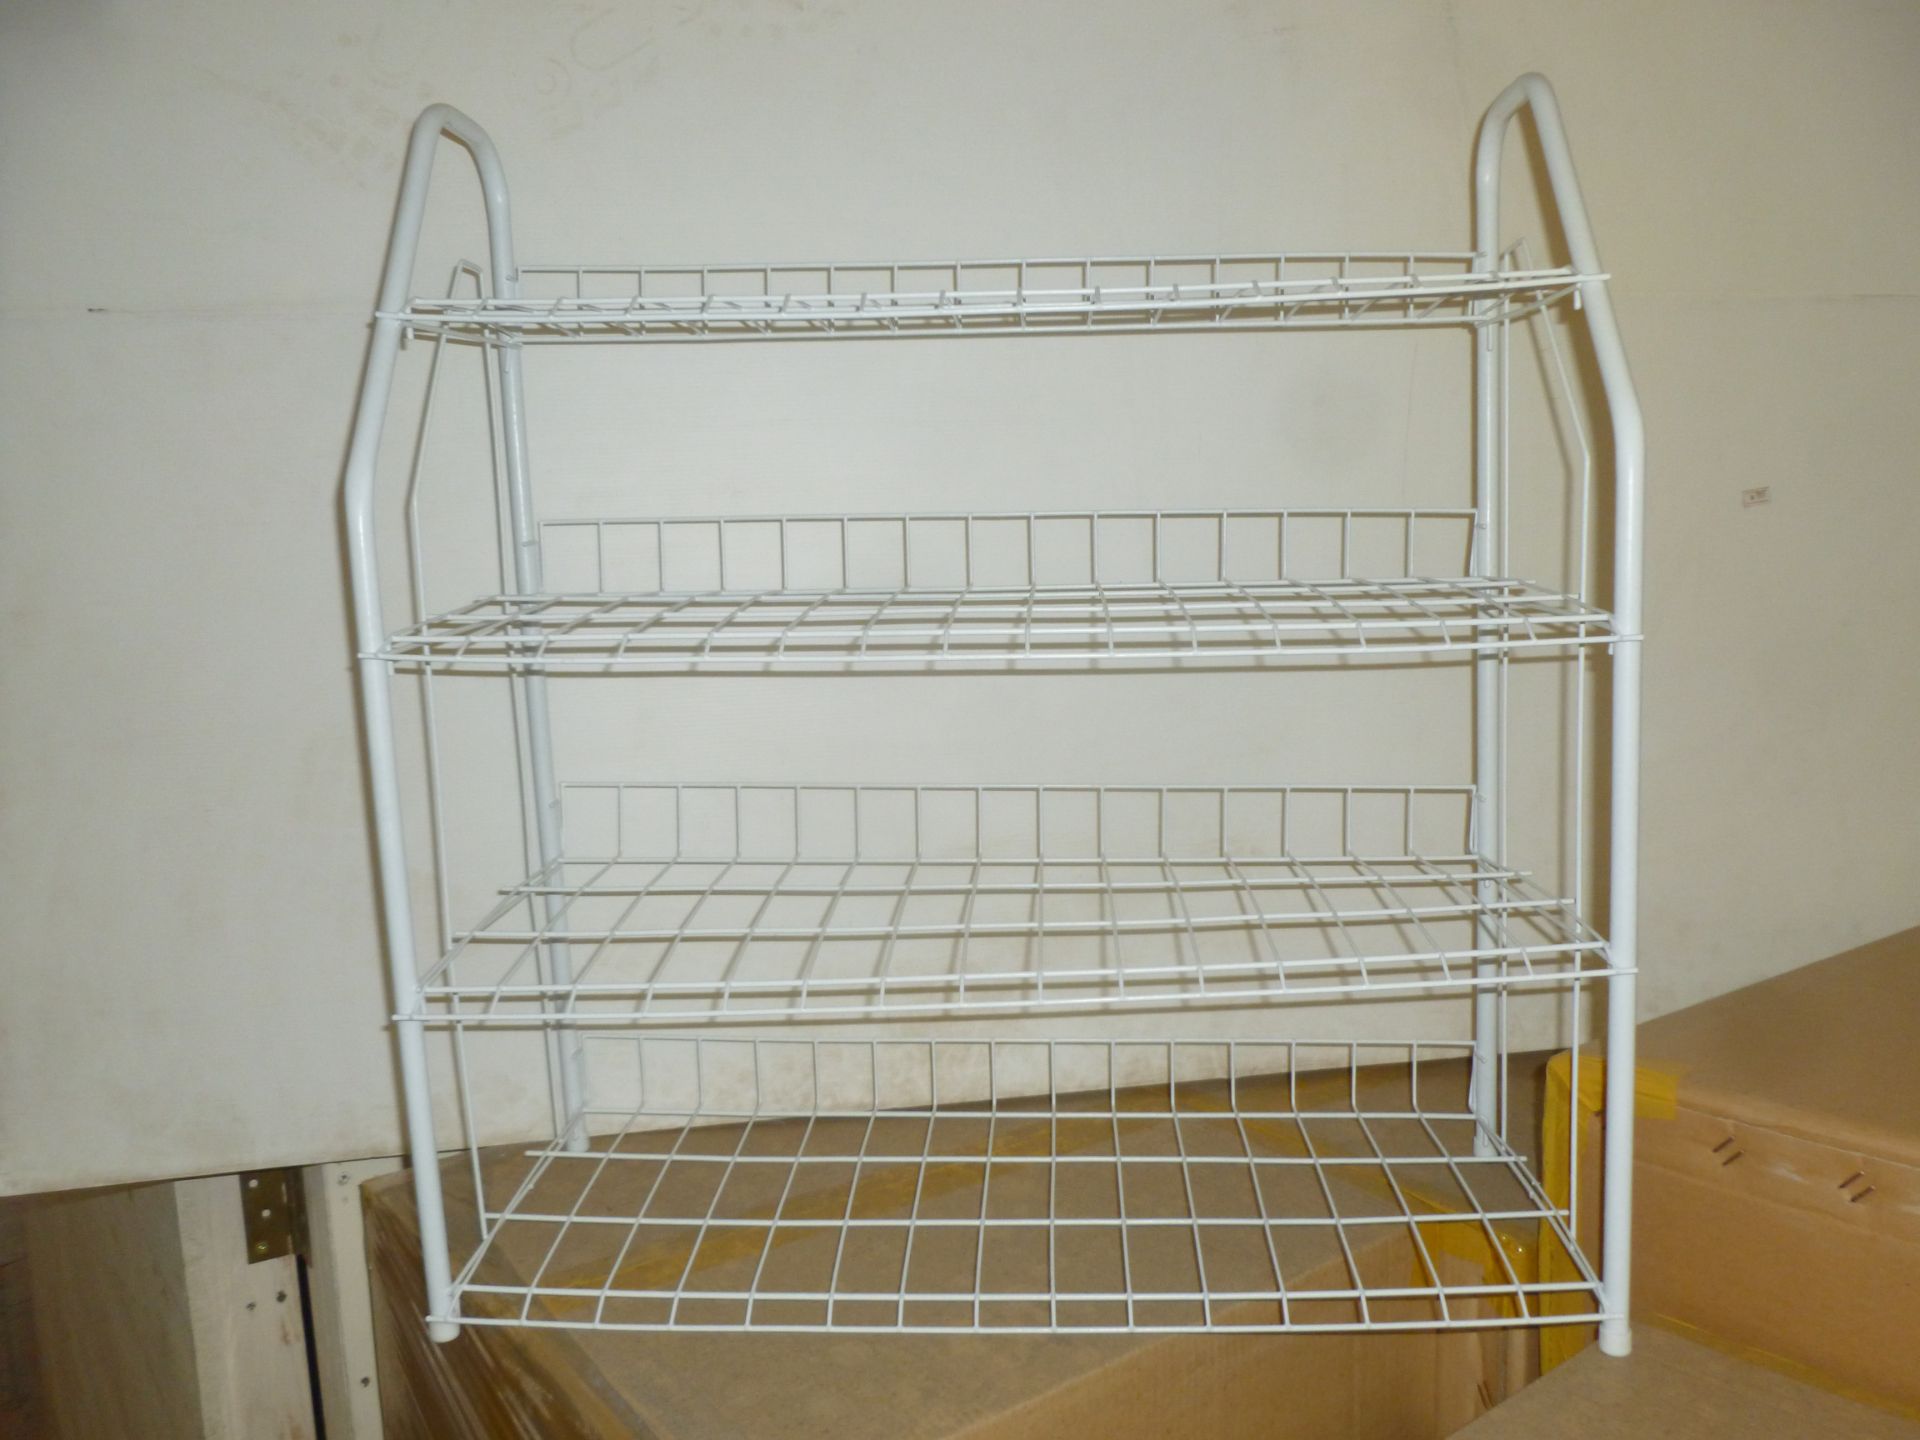 Pallet of approx 72 Von Haus white shoe racks, Brand new overstock, RRP £19.99 giving a total retail - Image 2 of 2